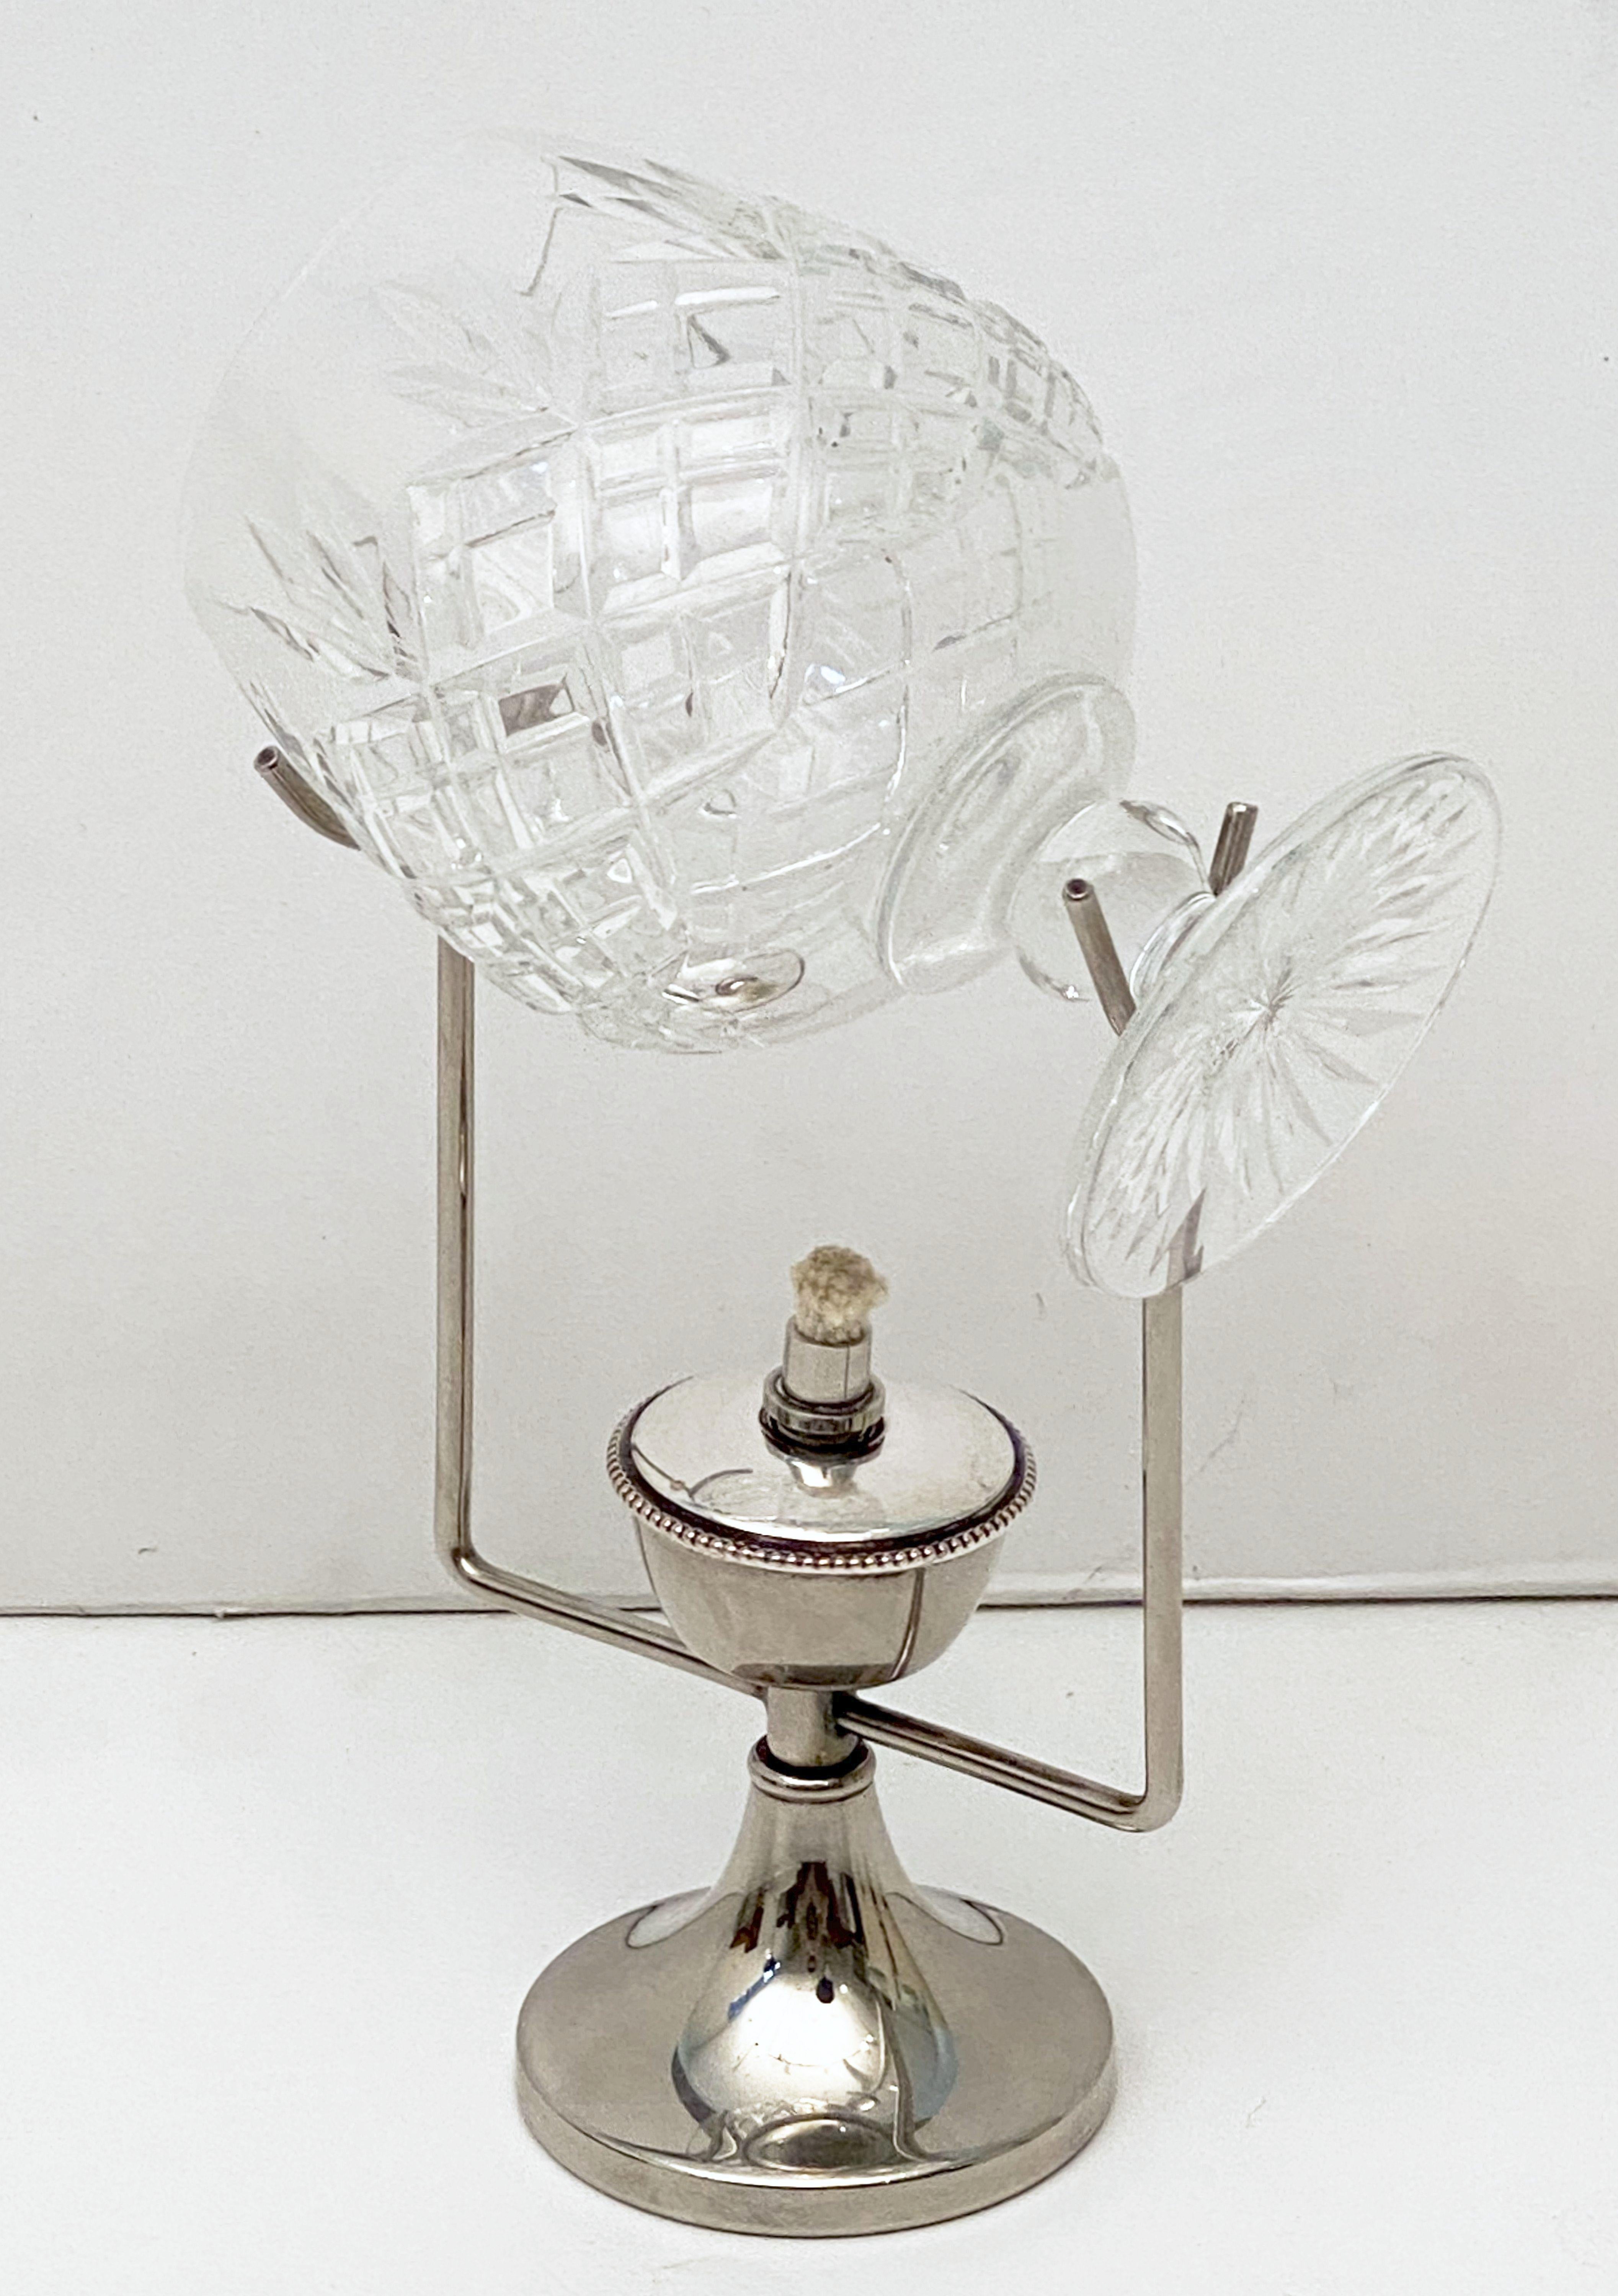 An English brandy glass warmer of fine silver plate, featuring a stand for the glass and spirit lamp below.
The spirit lamp is supplied with a wick.
The oil (not included) is added by unscrewing the top of the lamp.
The brandy cut glass snifter